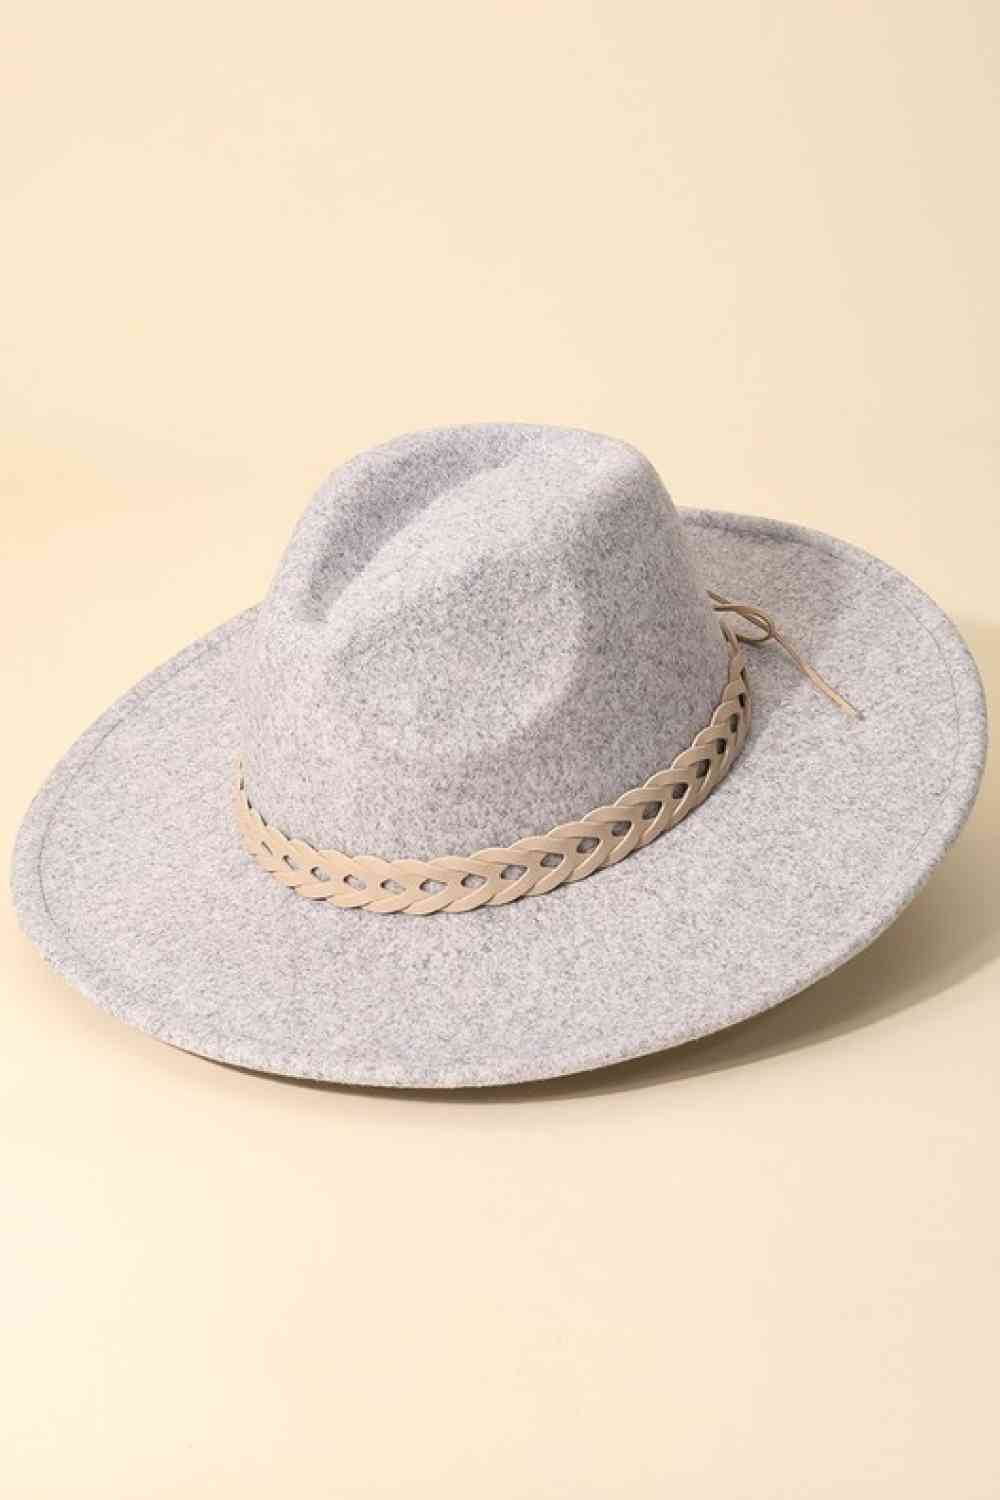 Fame Woven Together Braided Strap Fedora Mid Gray One Size